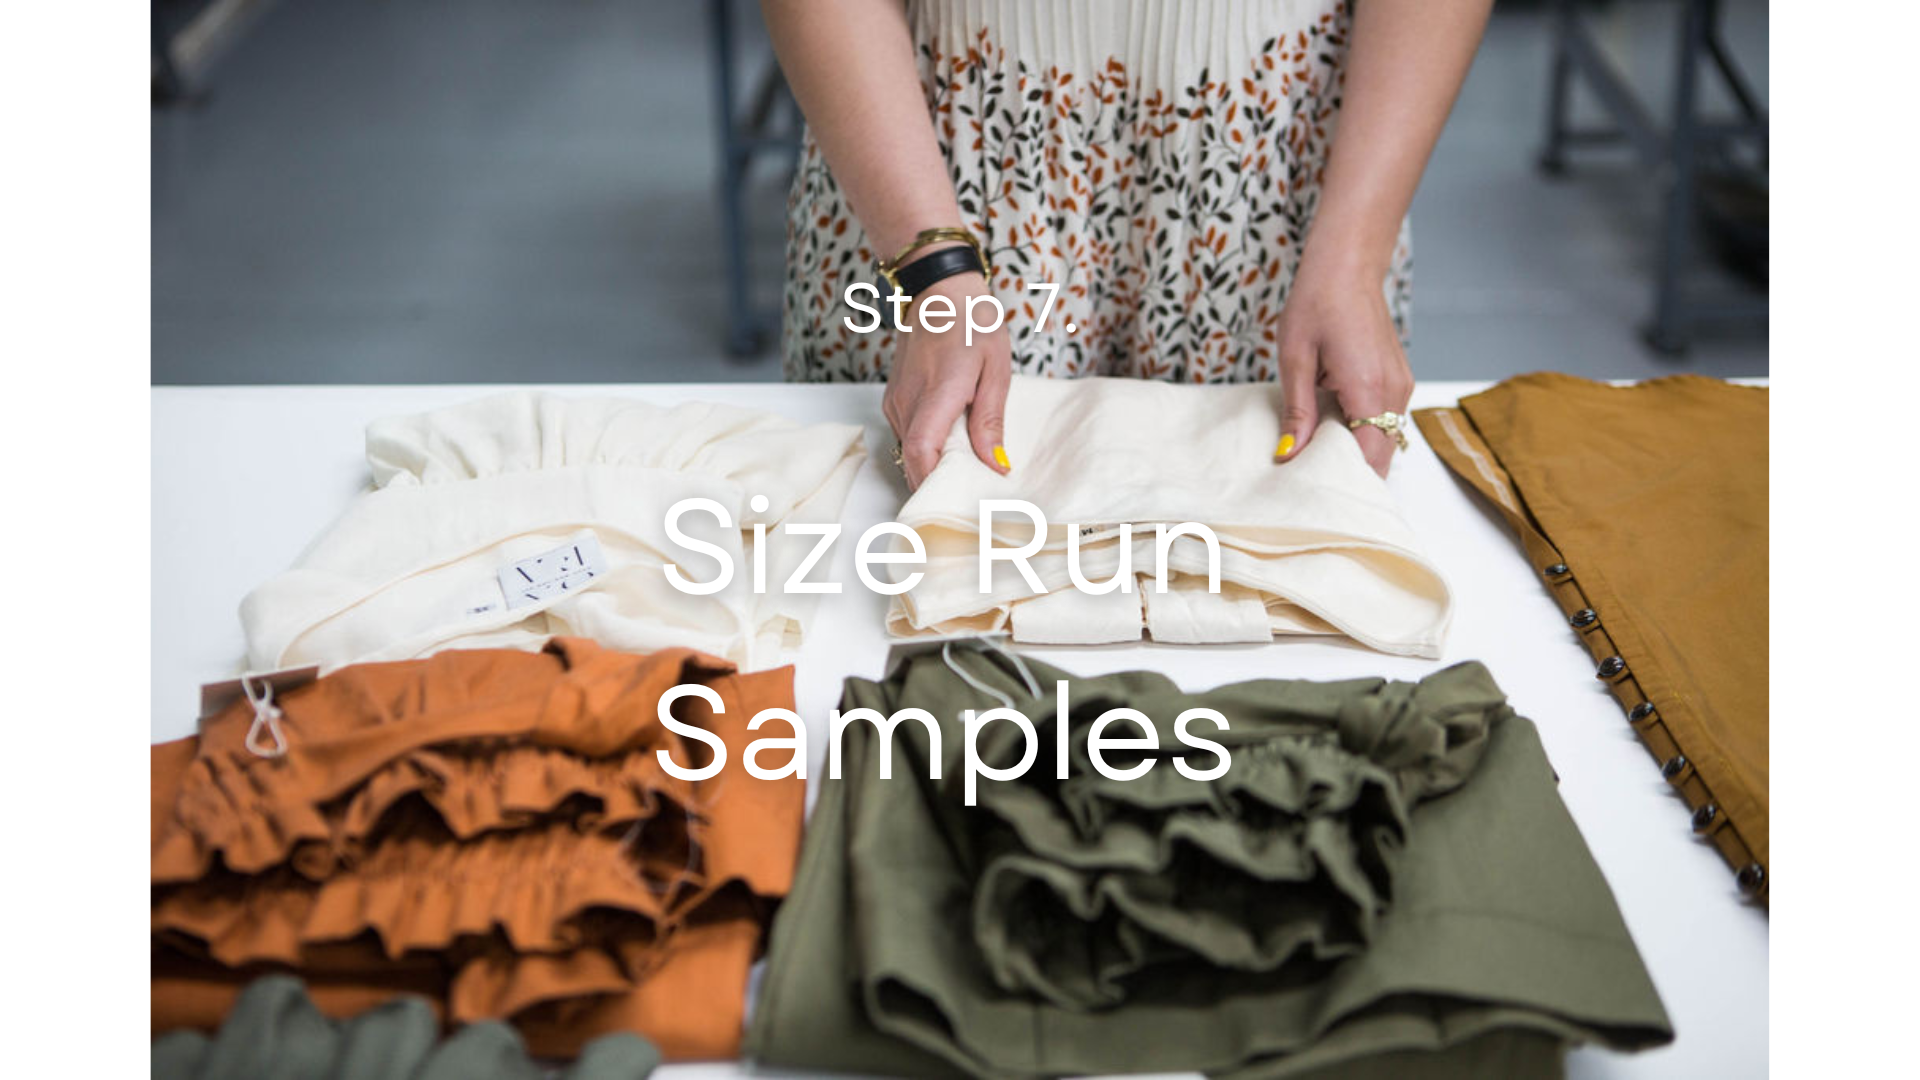 Step 7 Size Run Samples (3).png